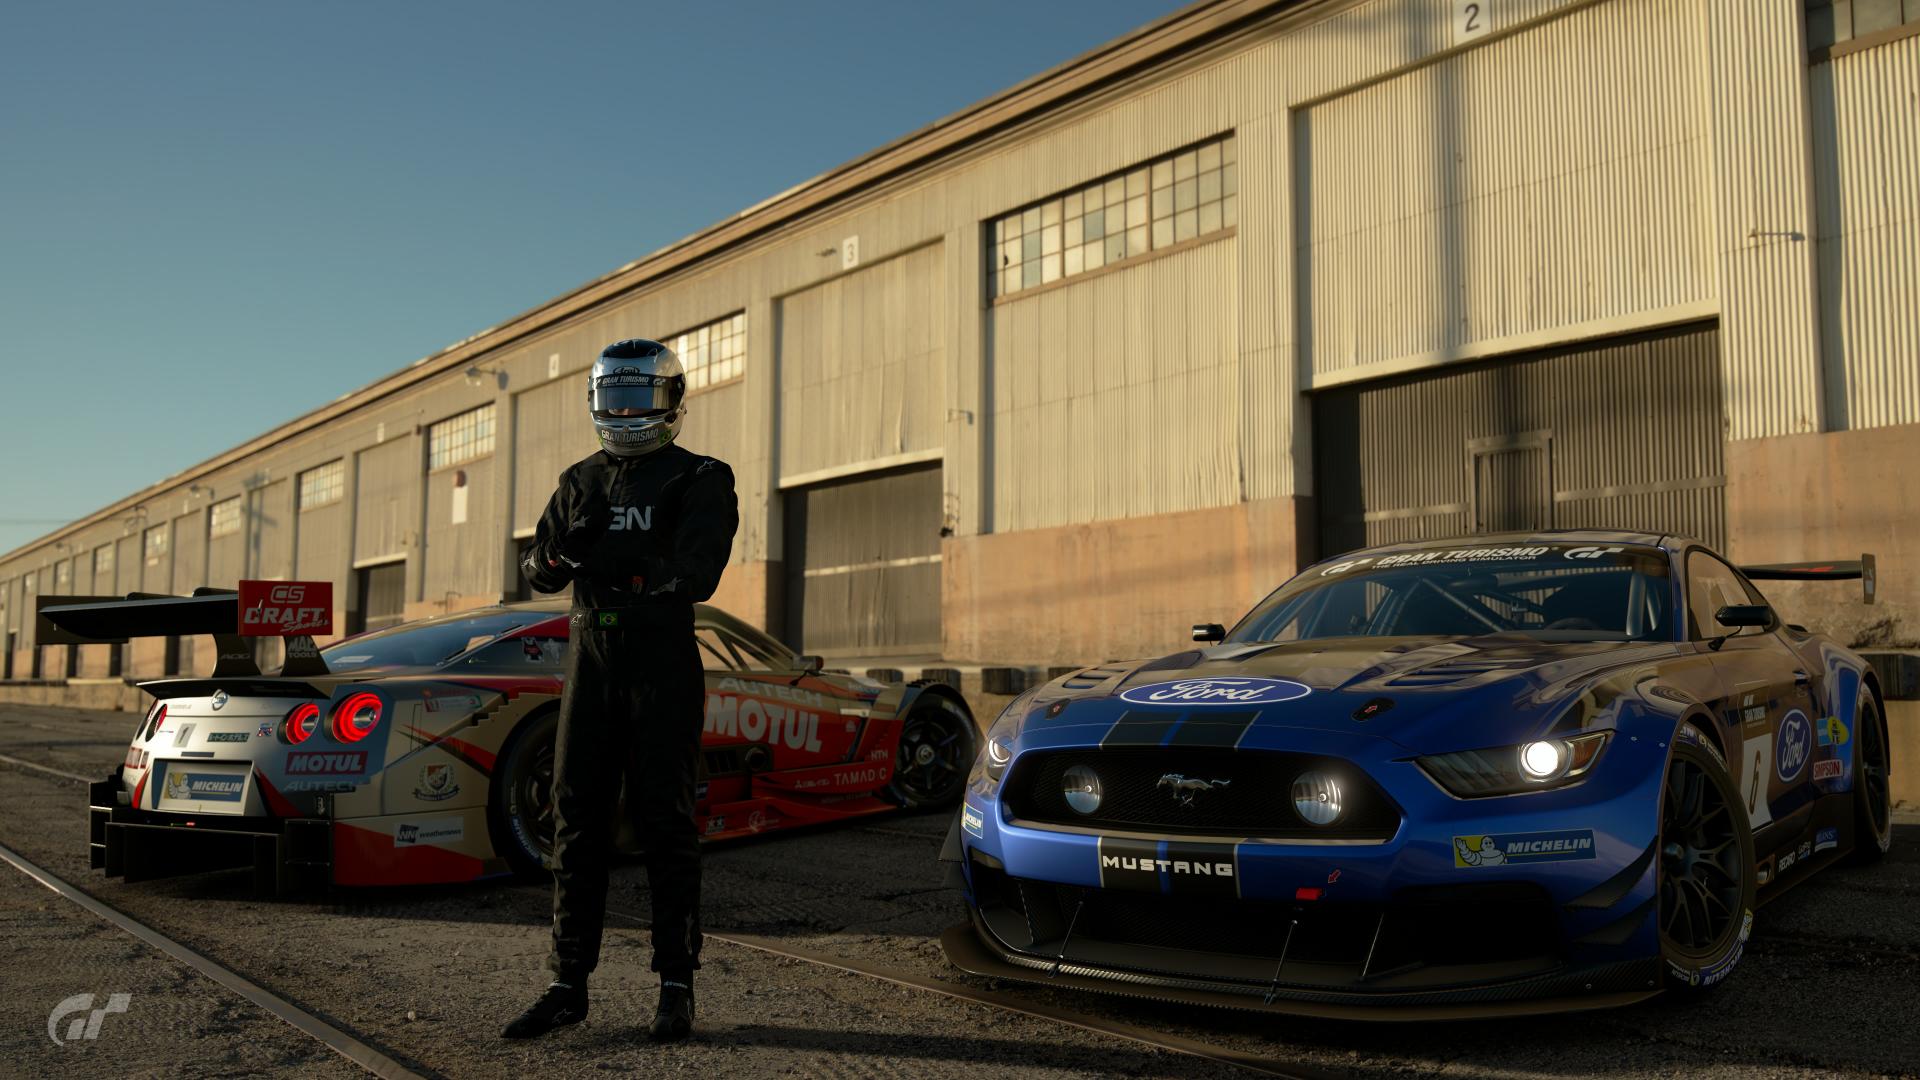 General 1920x1080 Gran Turismo Sport car Gran Turismo Ford Nissan Ford Mustang Nissan GT-R race cars muscle cars American cars Japanese cars video games